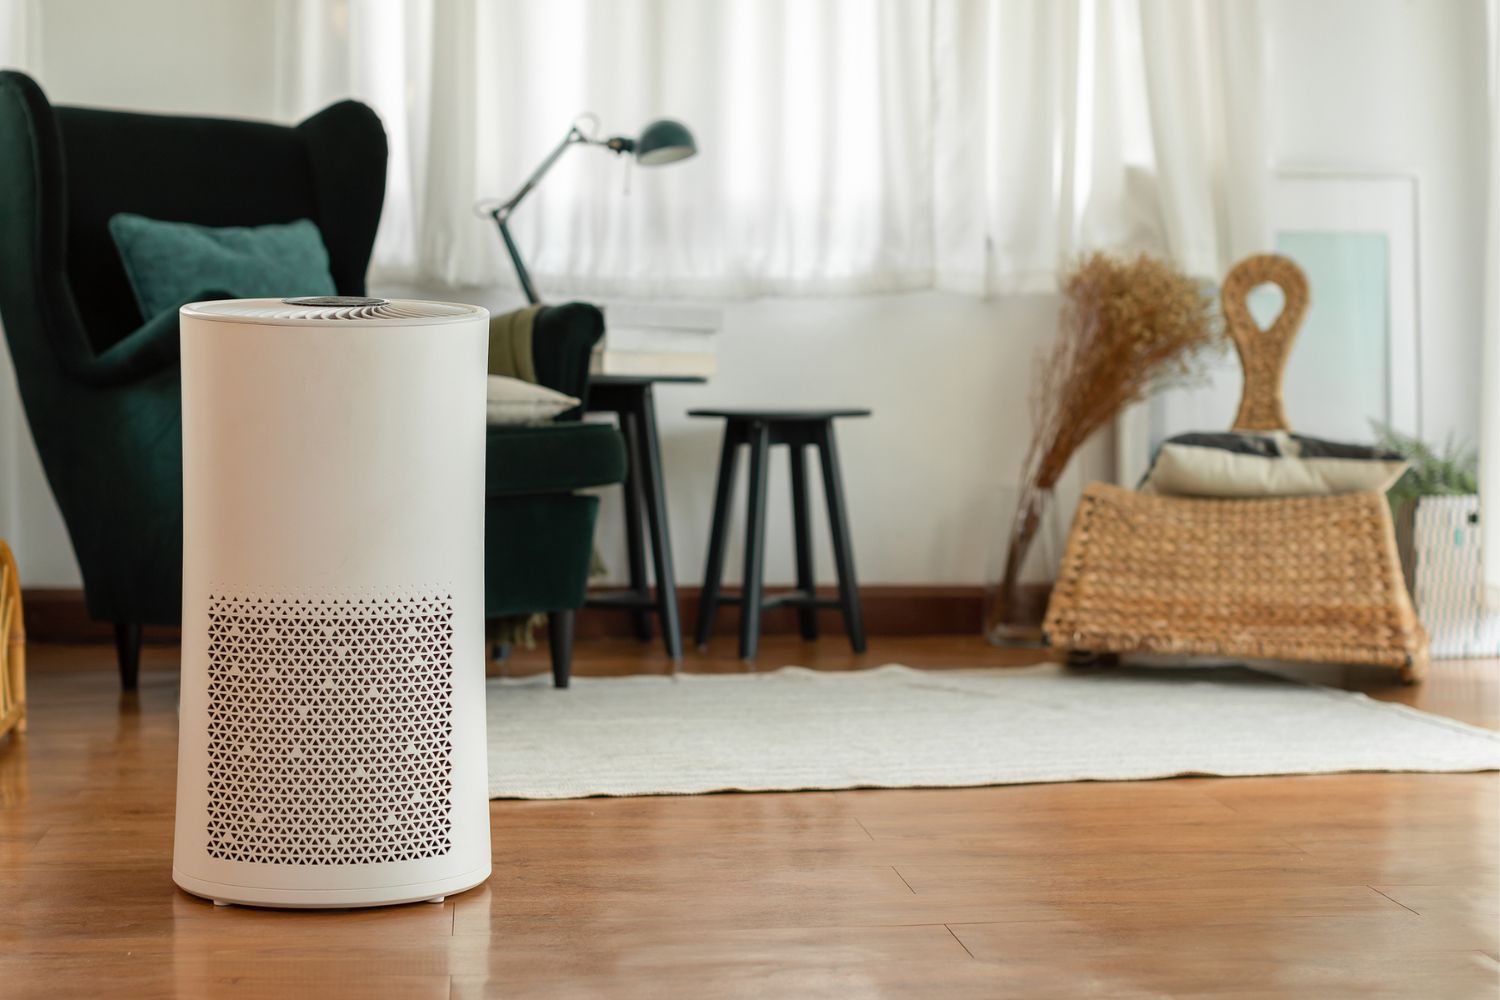 How Much Does a Whole-House Air Purifier Cost